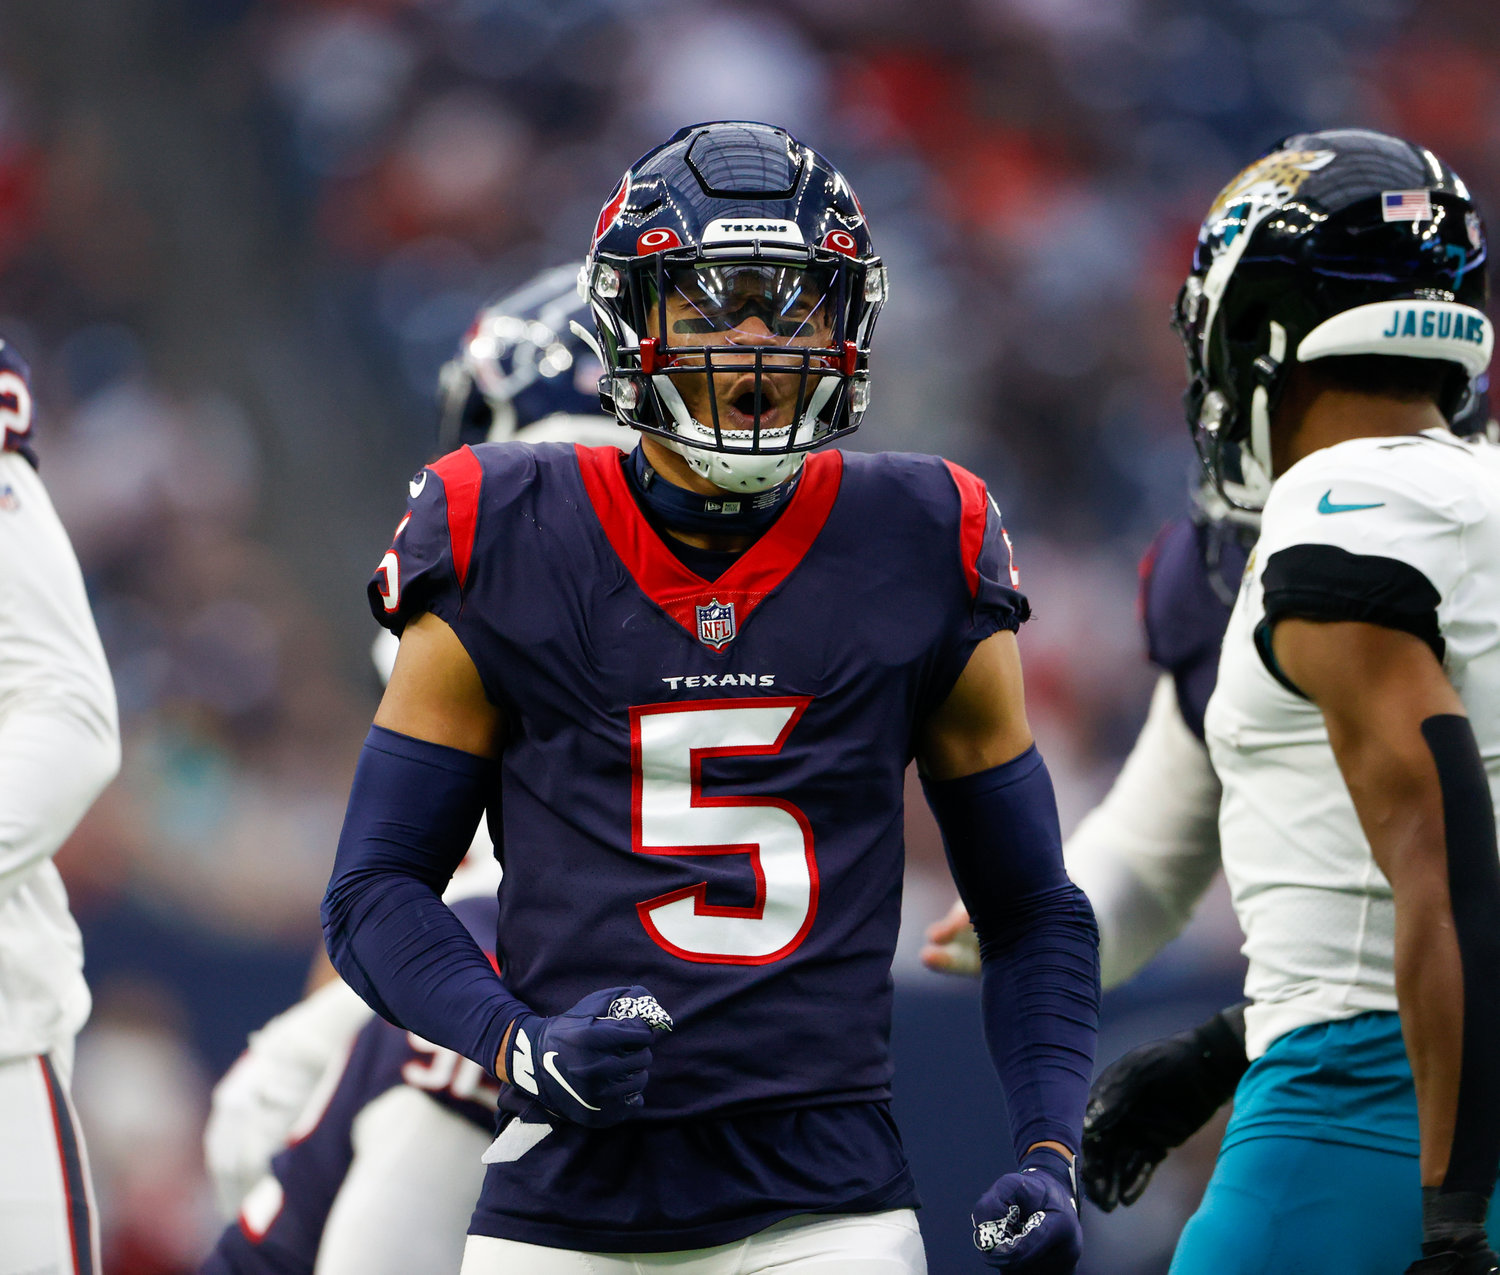 Texans safety Jalen Pitre (5) reacts after a defensive play during an NFL game between the Houston Texans and the Jacksonville Jaguars on Jan. 1, 2023 in Houston. The Jaguars won, 31-3.